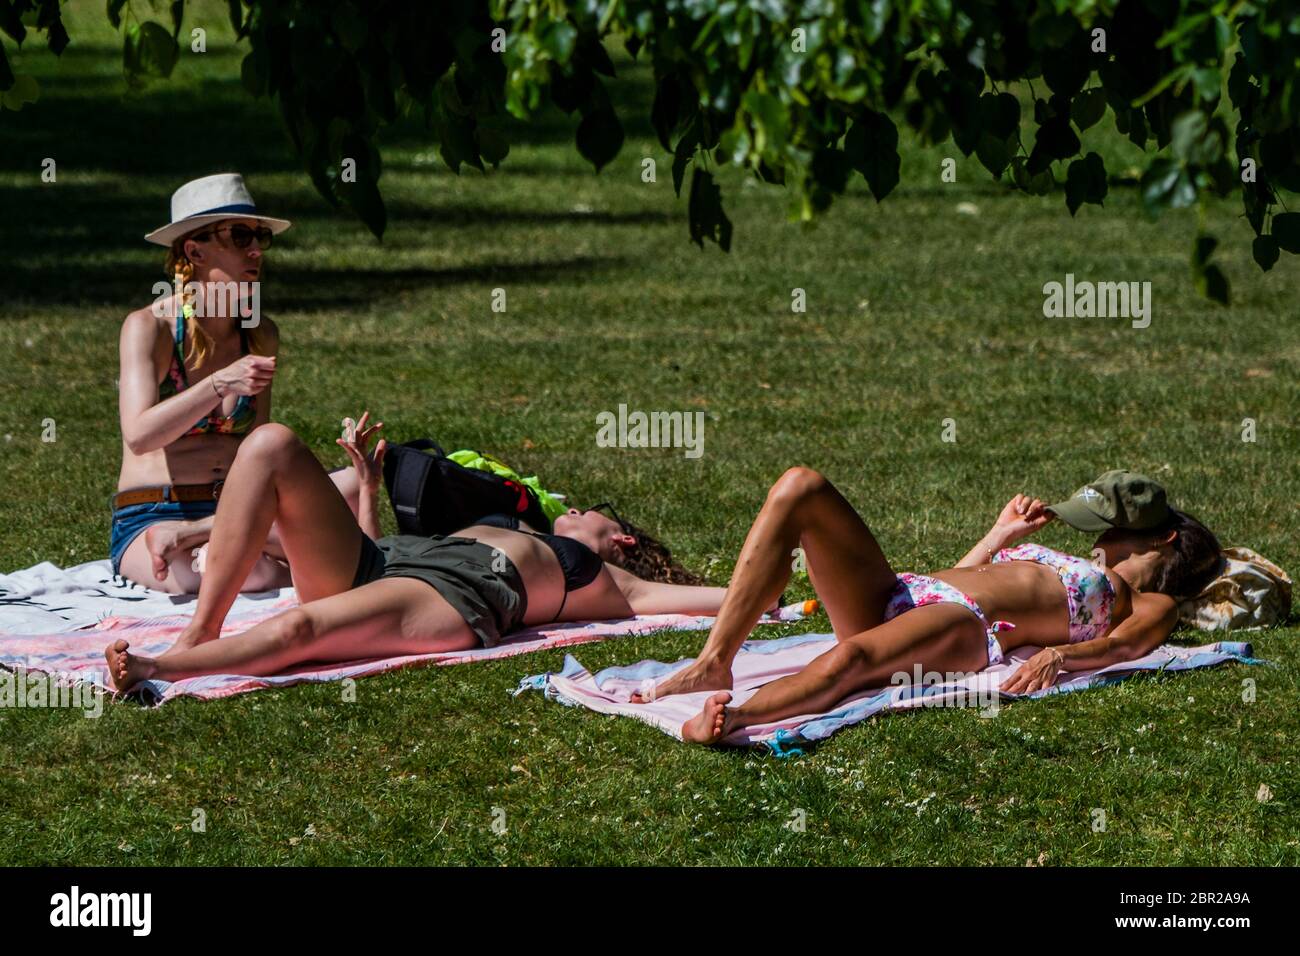 London, UK. 20th May, 2020. Sunbathing, some bring their own loungers, some just lie on towels - Enjoying the sun in St James Park as the sun comes out again. The 'lockdown' continues for the Coronavirus (Covid 19) outbreak in London. Credit: Guy Bell/Alamy Live News Stock Photo